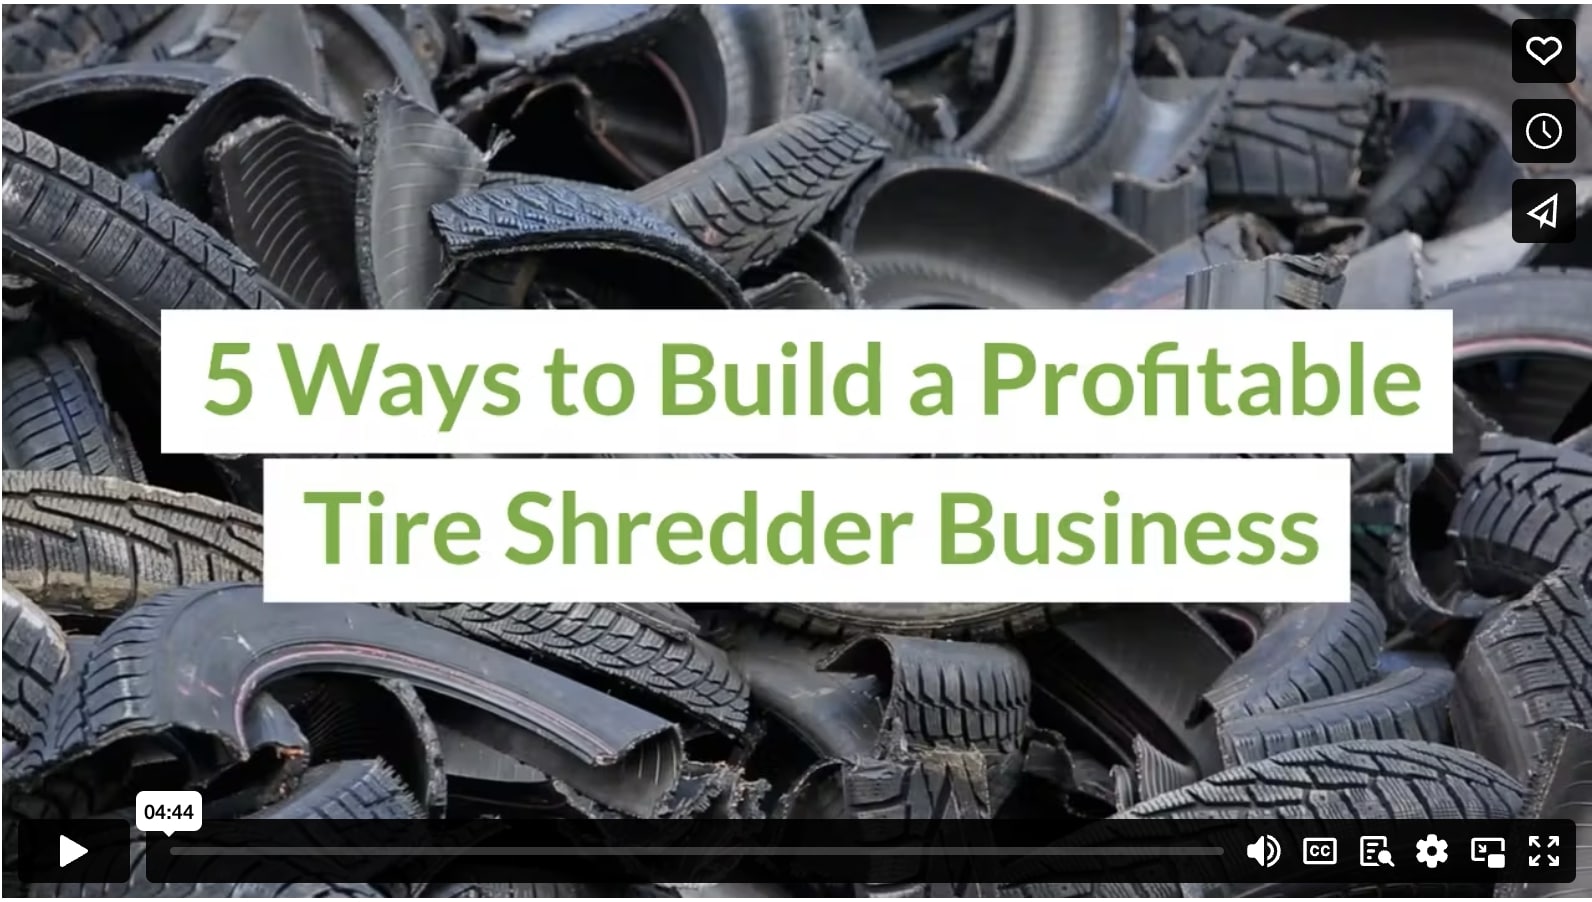 5 Ways to Build a Profitable Tire Shredder Business